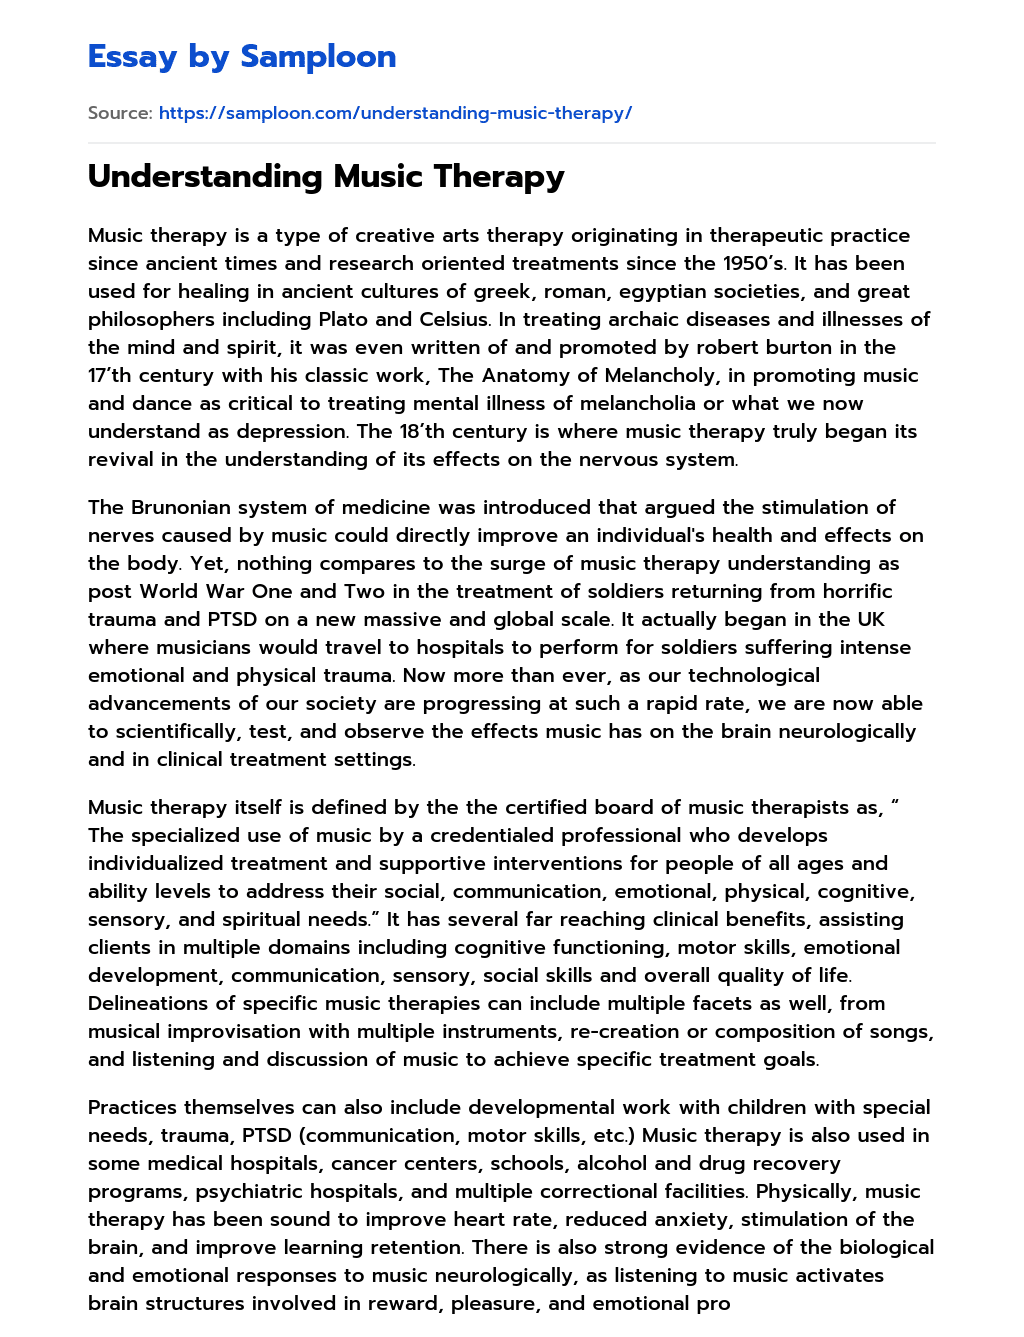 Understanding Music Therapy essay